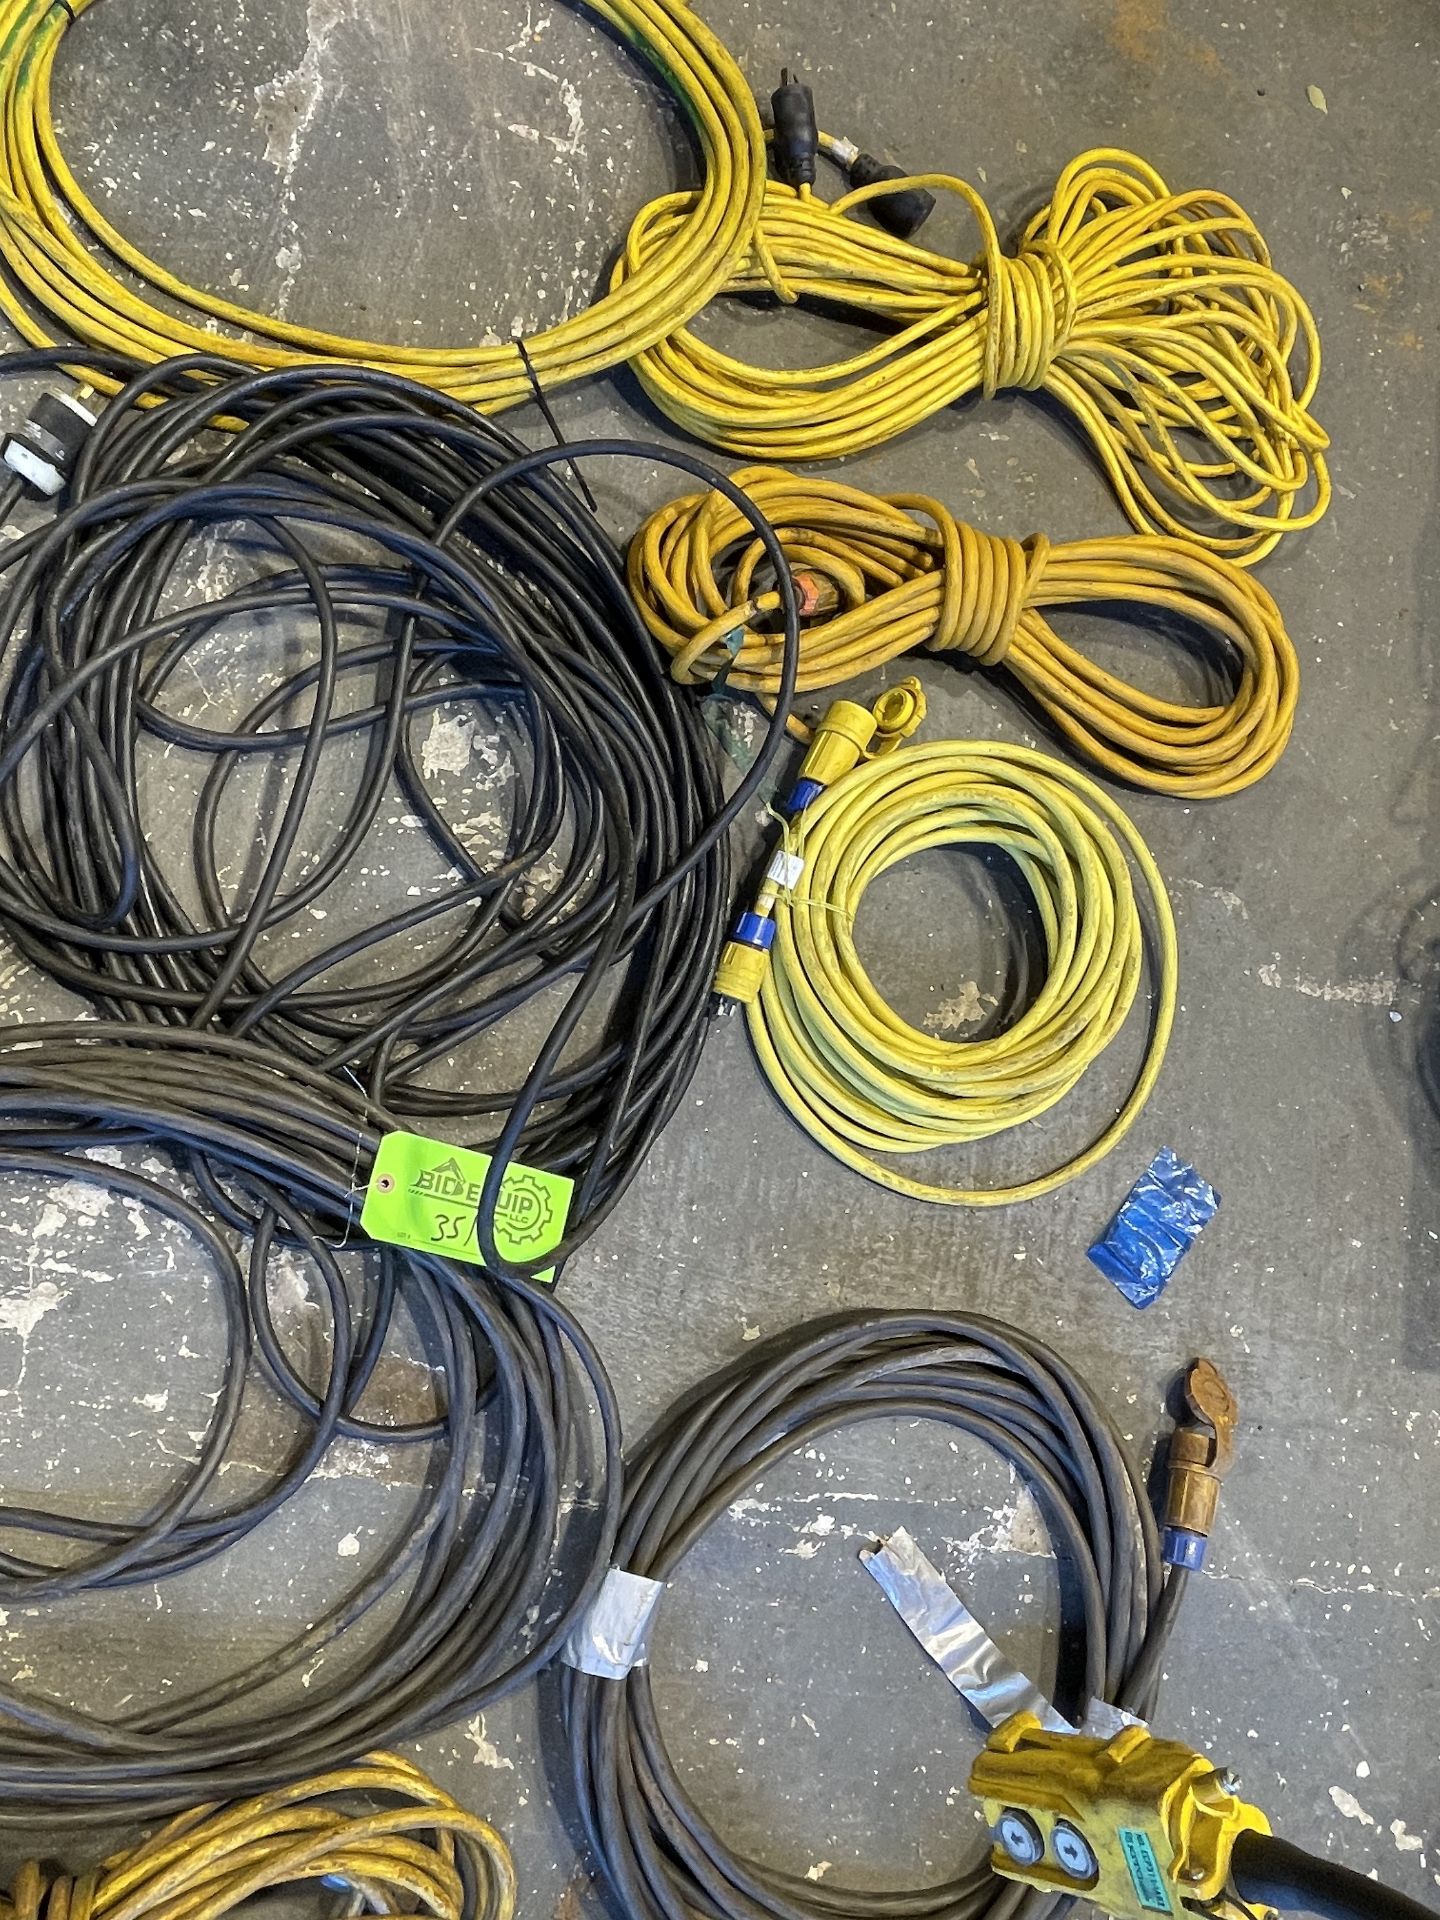 Lot of Extension Cords - Upland - Image 7 of 11